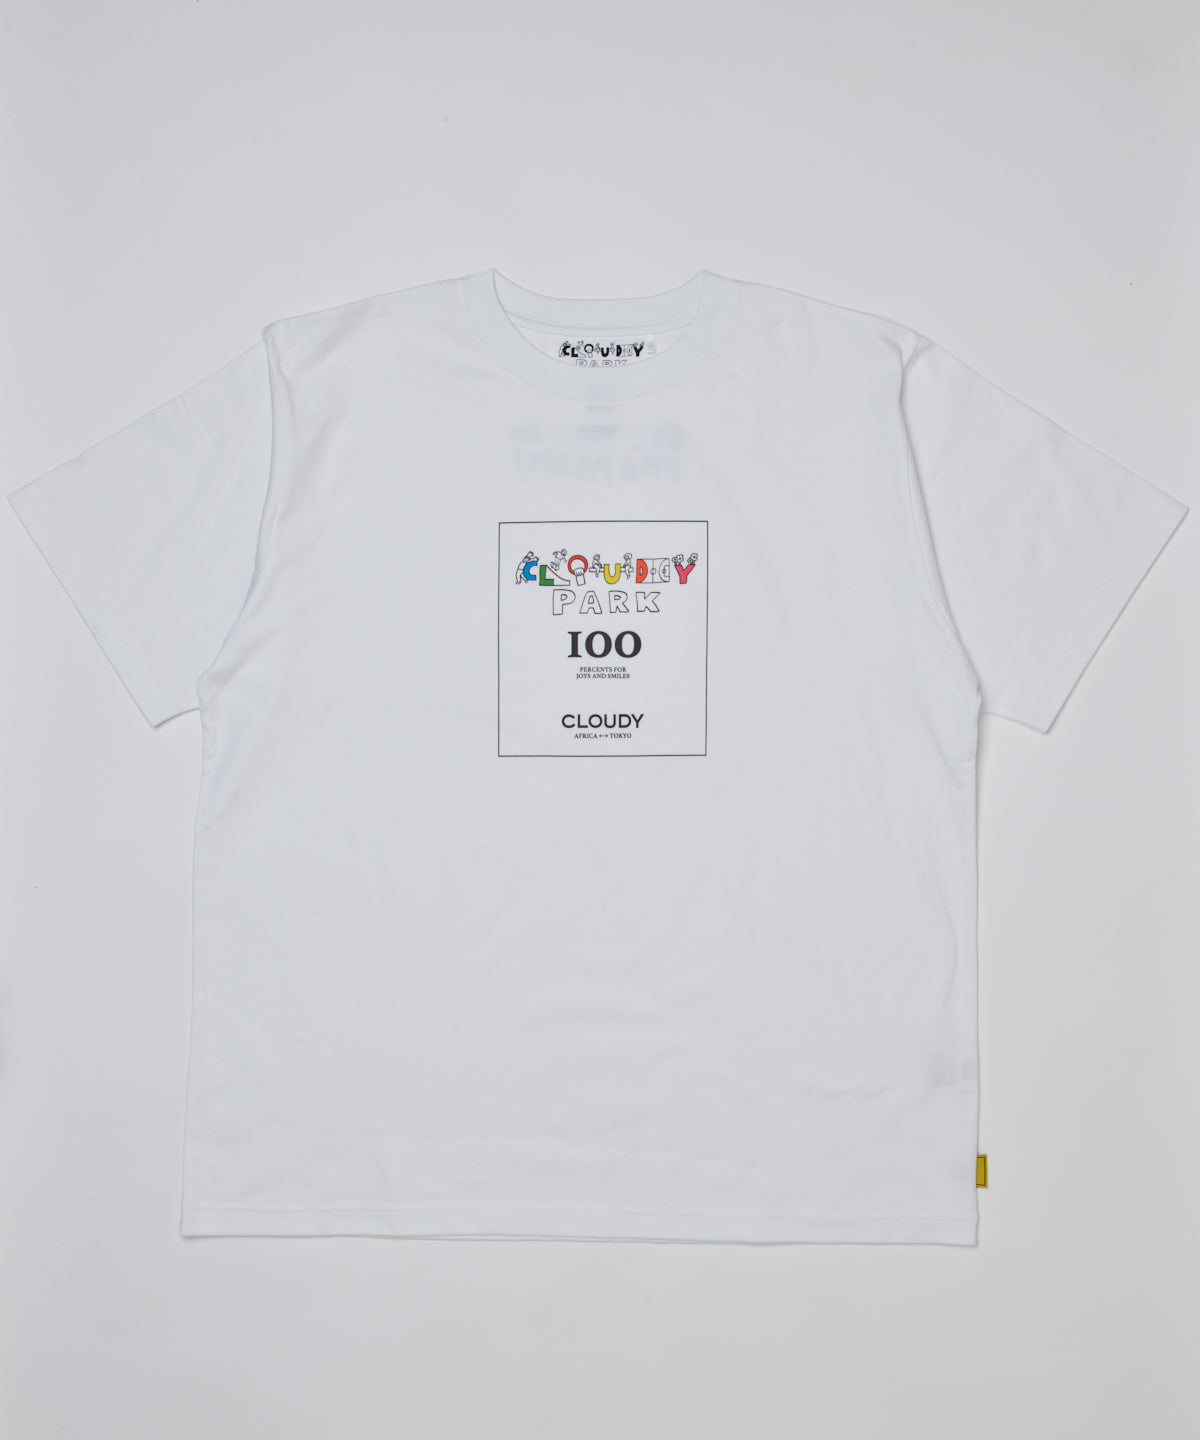 Park T-shirts SEE YOU IN THE PARK Message Half Sleeve WHITE